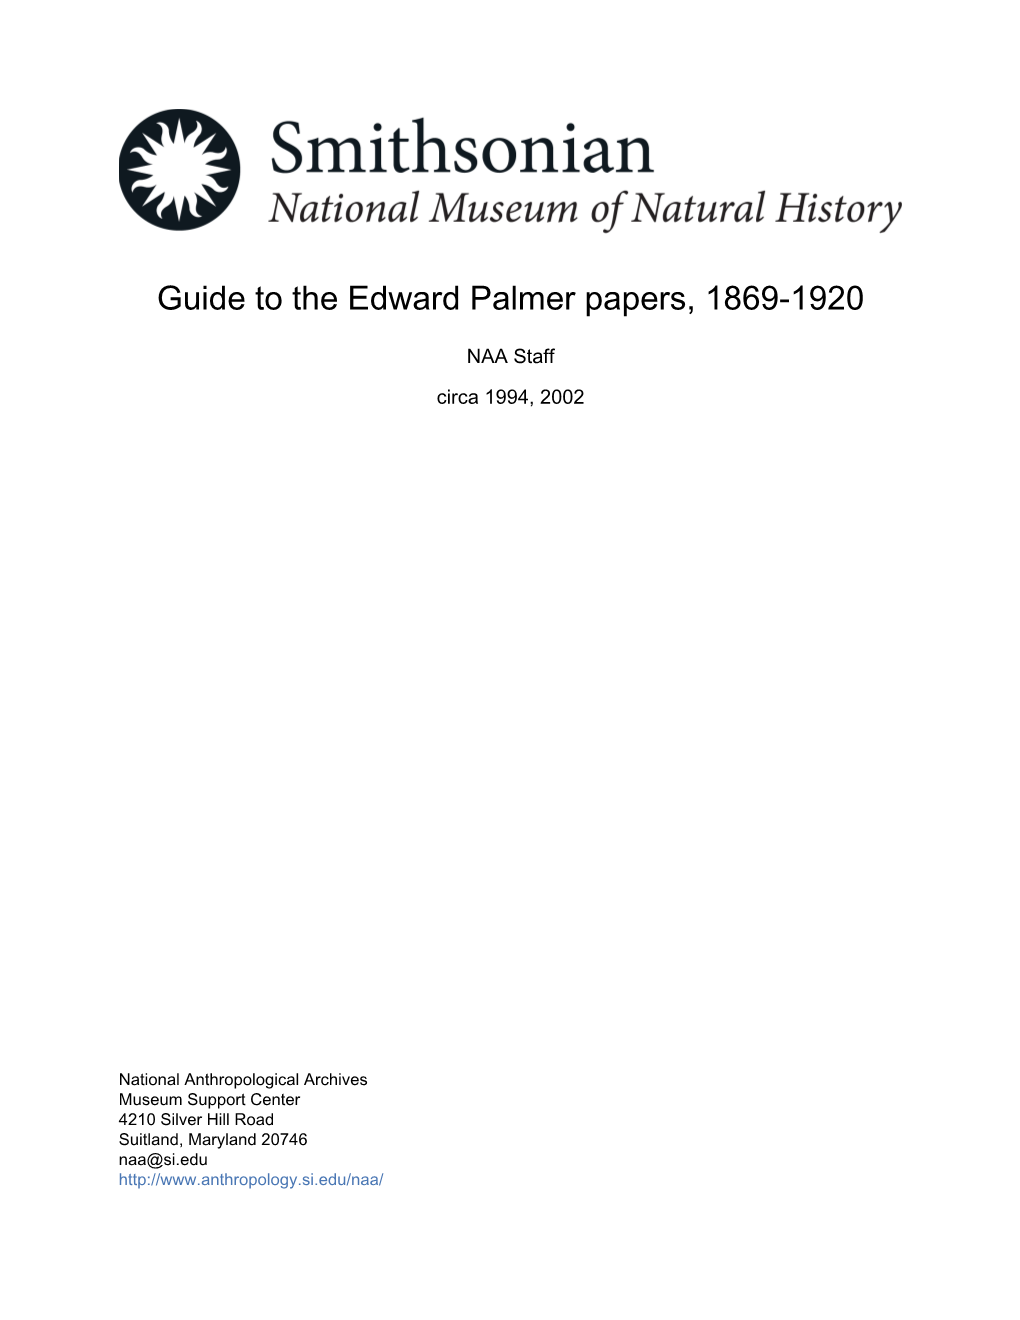 Guide to the Edward Palmer Papers, 1869-1920